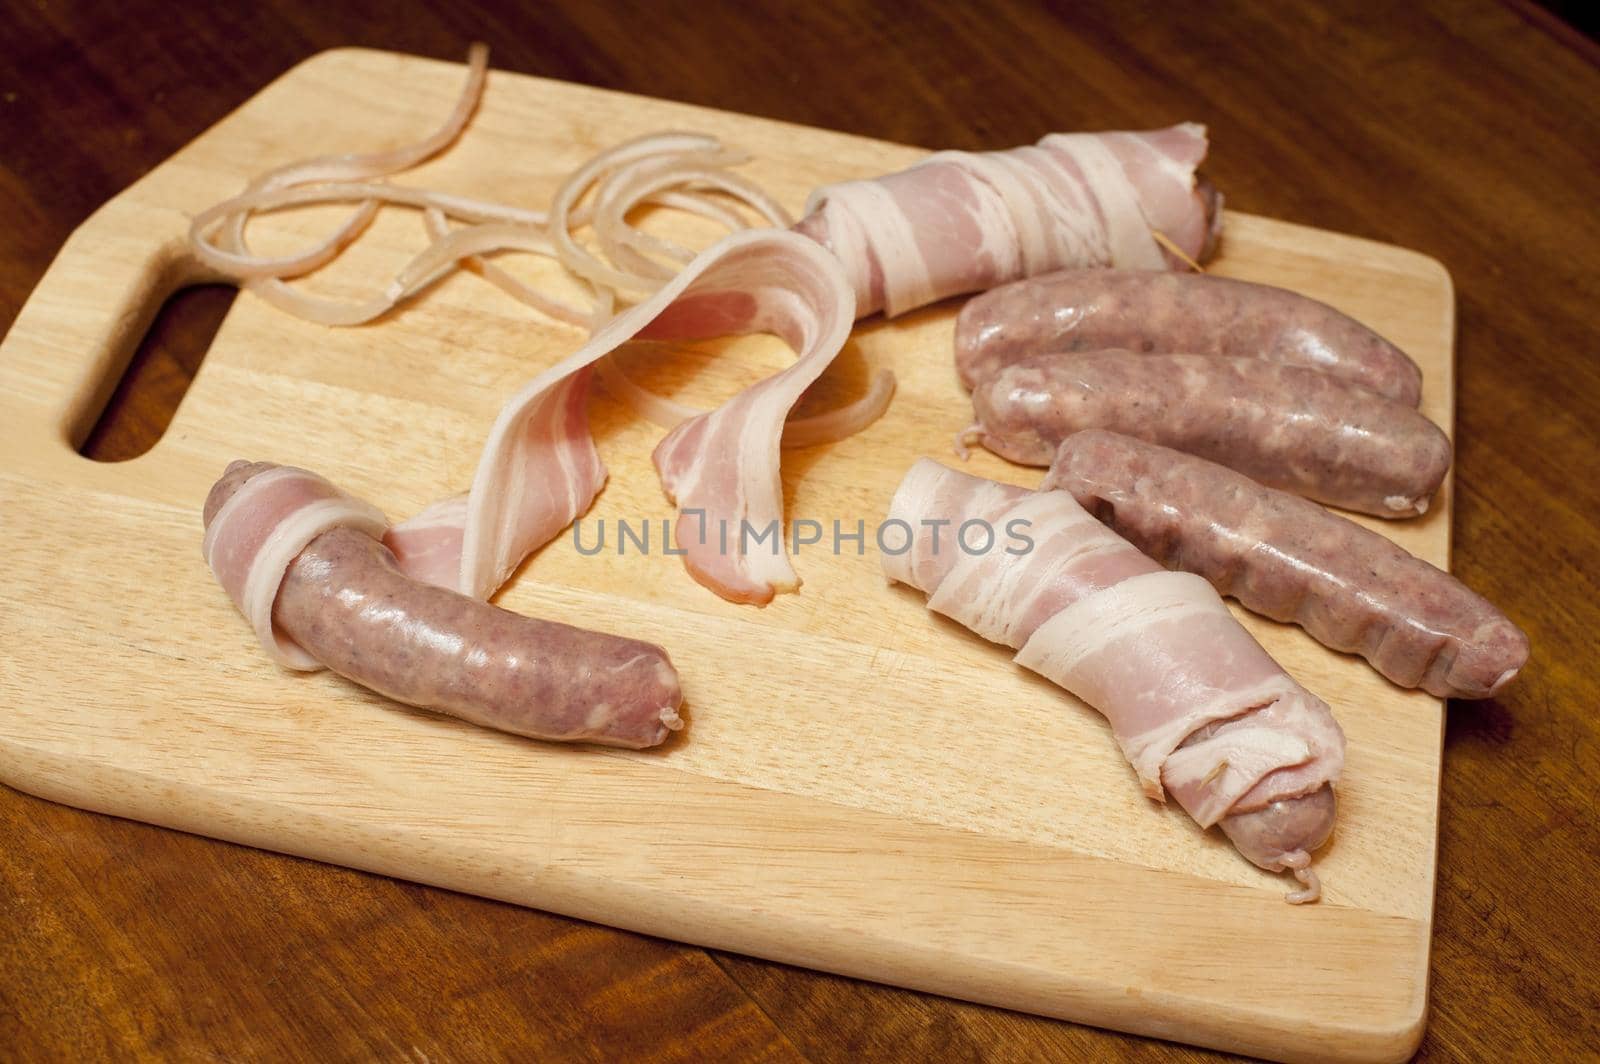 Making bacon rolls with spicy sausages wrapped in rashers of cured bacon laid out on a wooden board in the kitchen